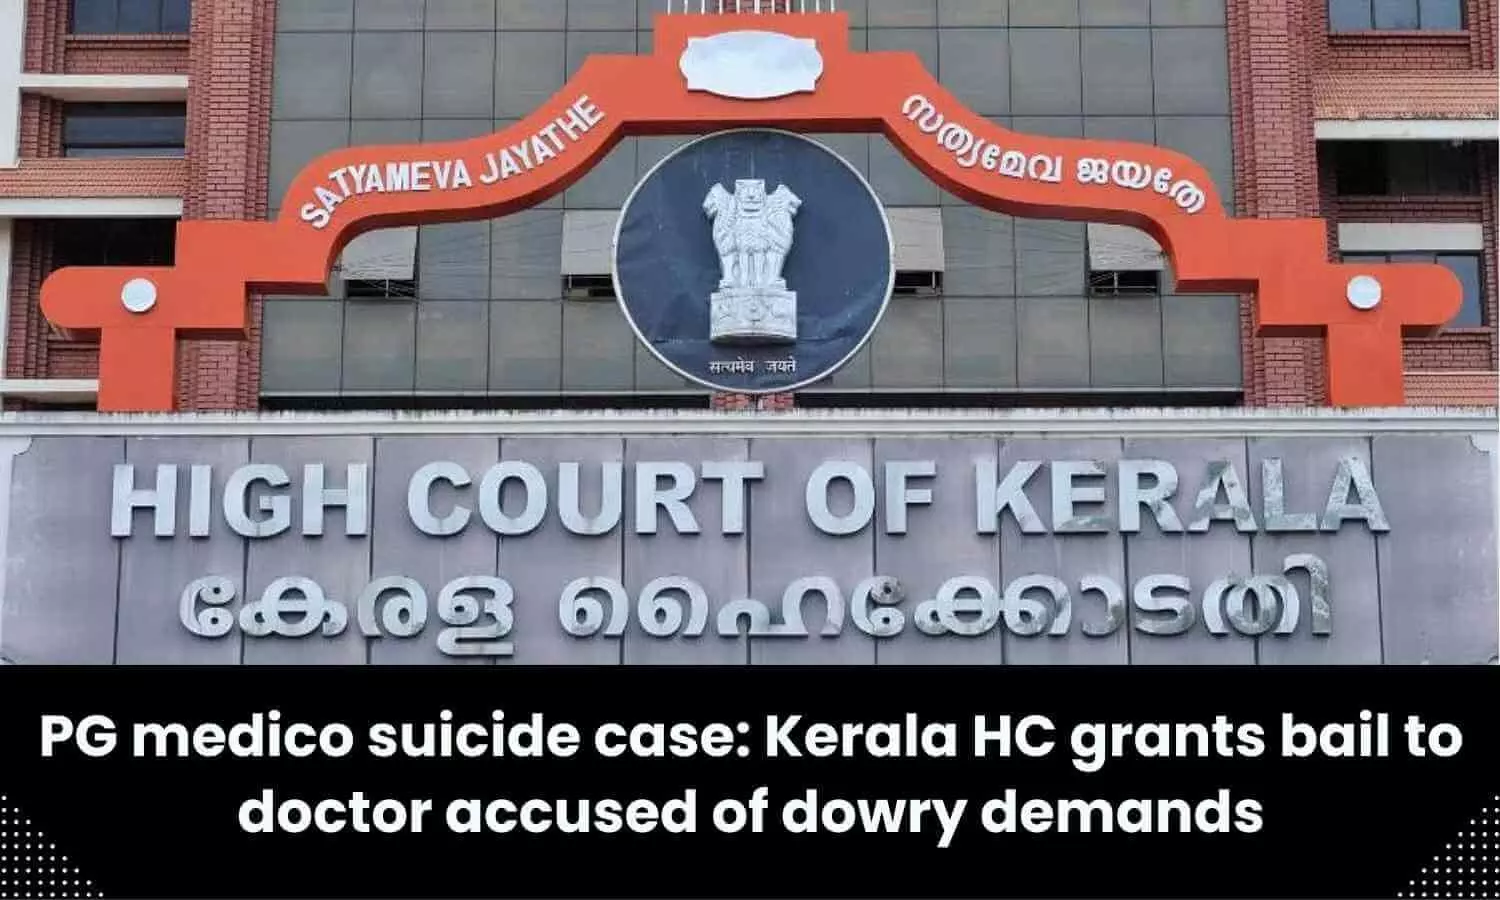 Kerala High Court grants bail to doctor accused of dowry demands